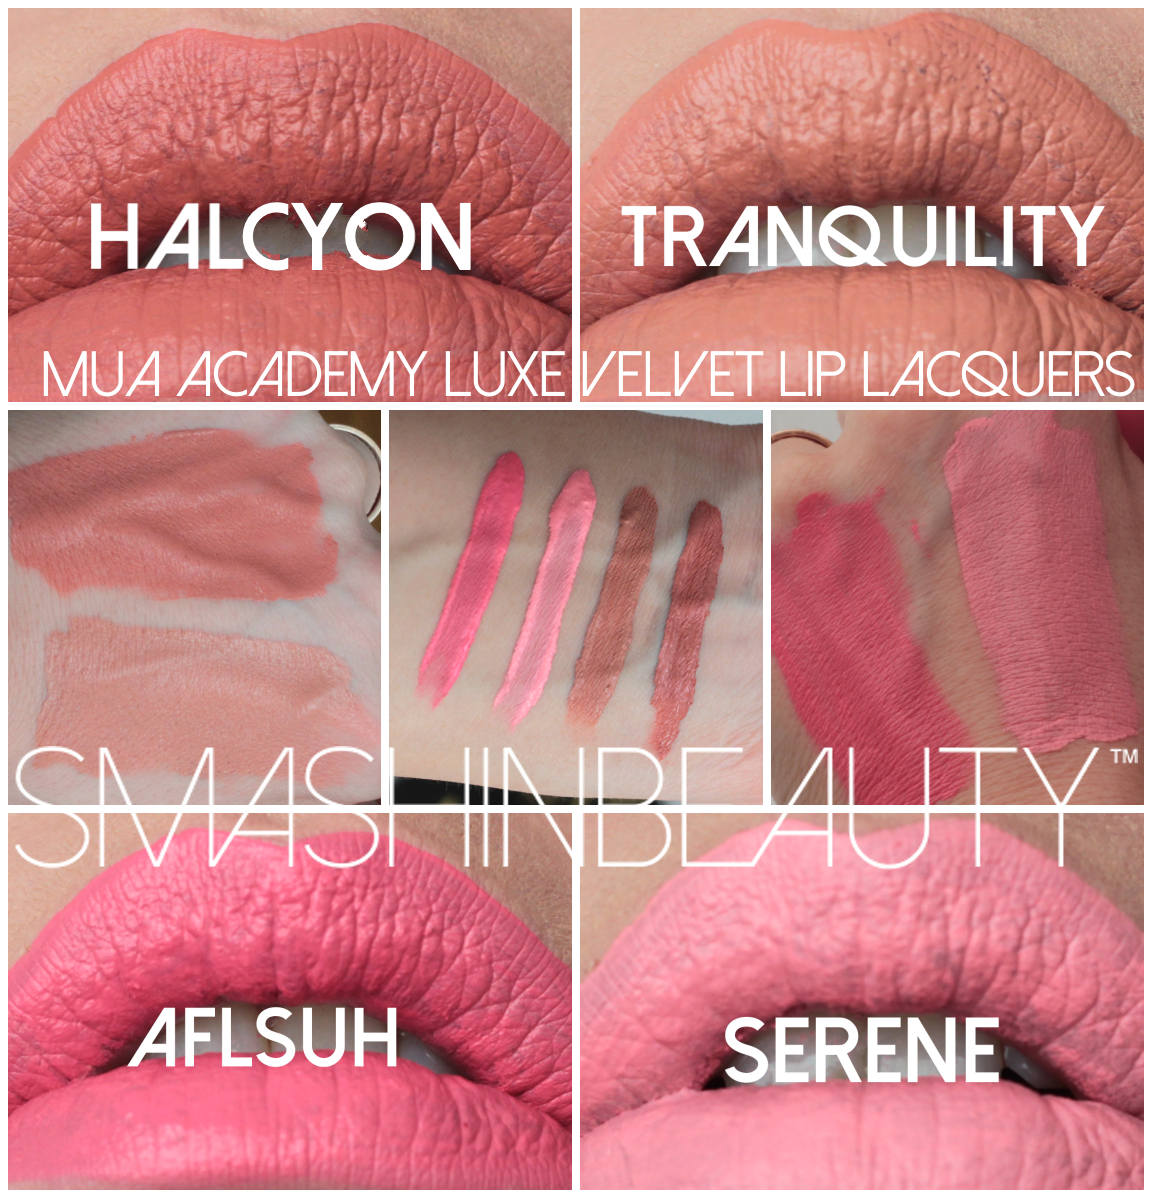 Schrijfmachine vredig Goed gevoel MUA academy luxe velvet lip lacquers in tranquility, halcyon, aflush and  serene swatches makeup review - SmashinBeauty